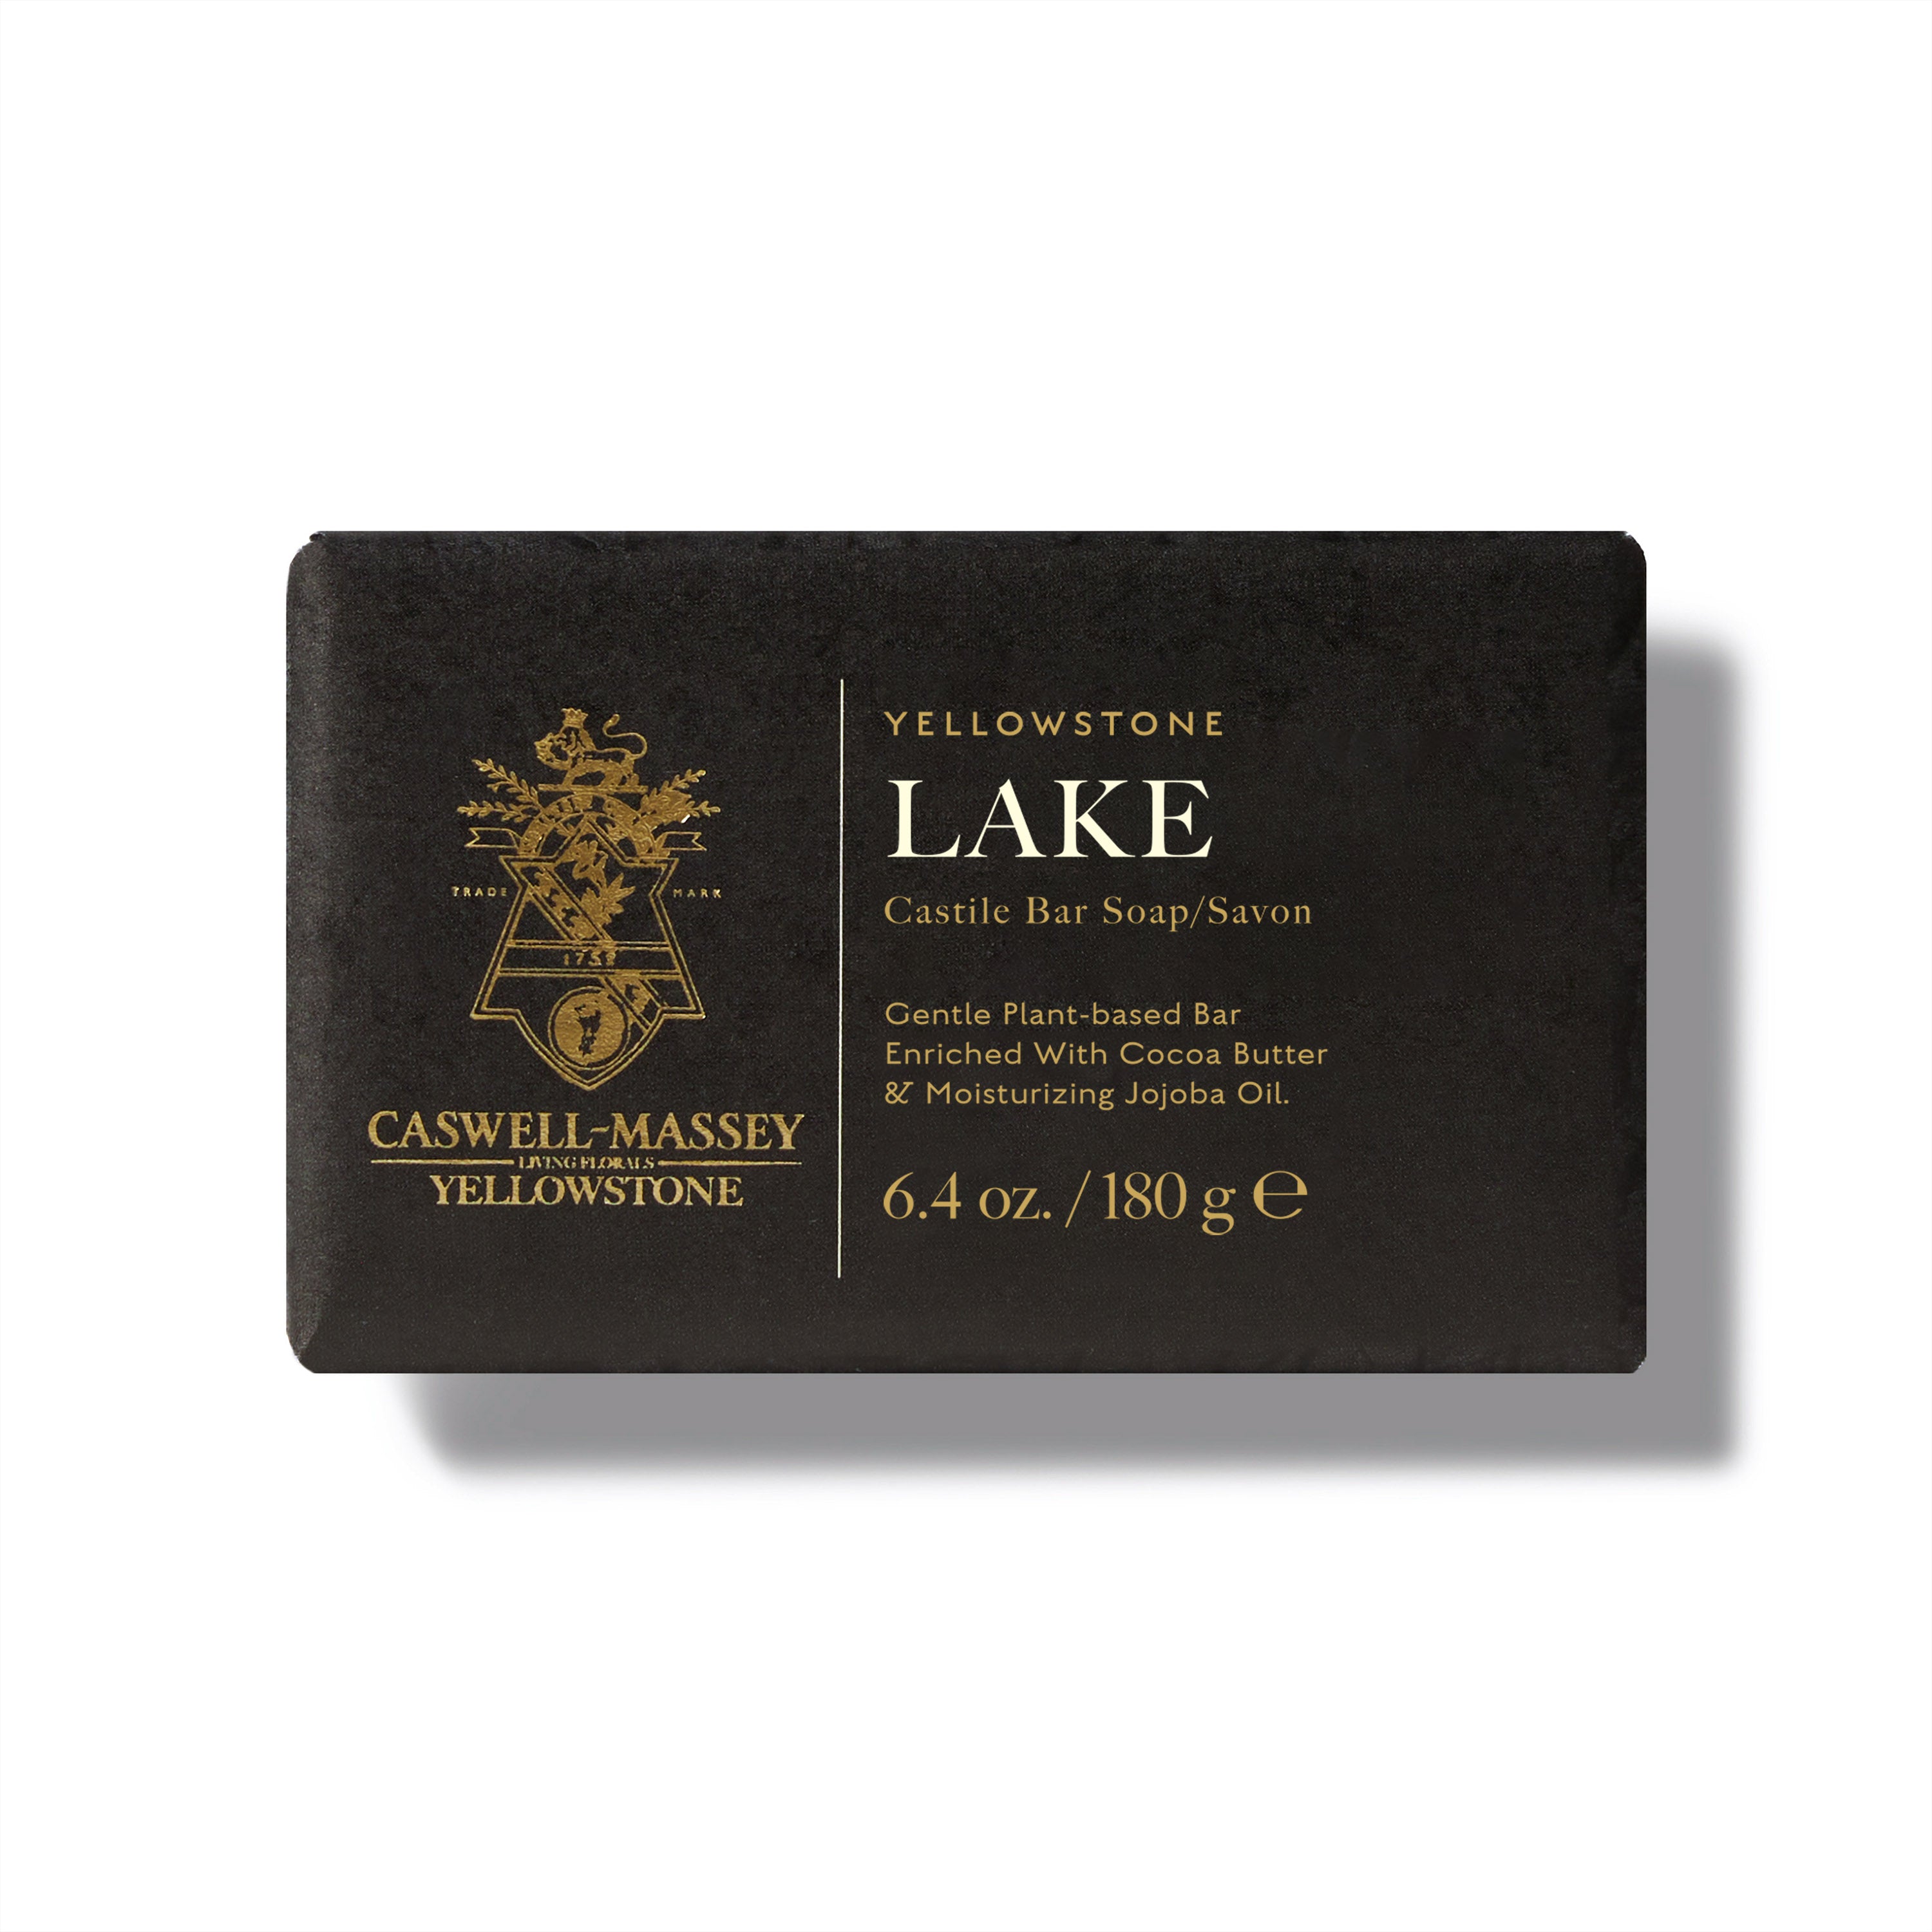 Caswell-Massey Yellowstone Lake Bar Soap shown with paper packaging